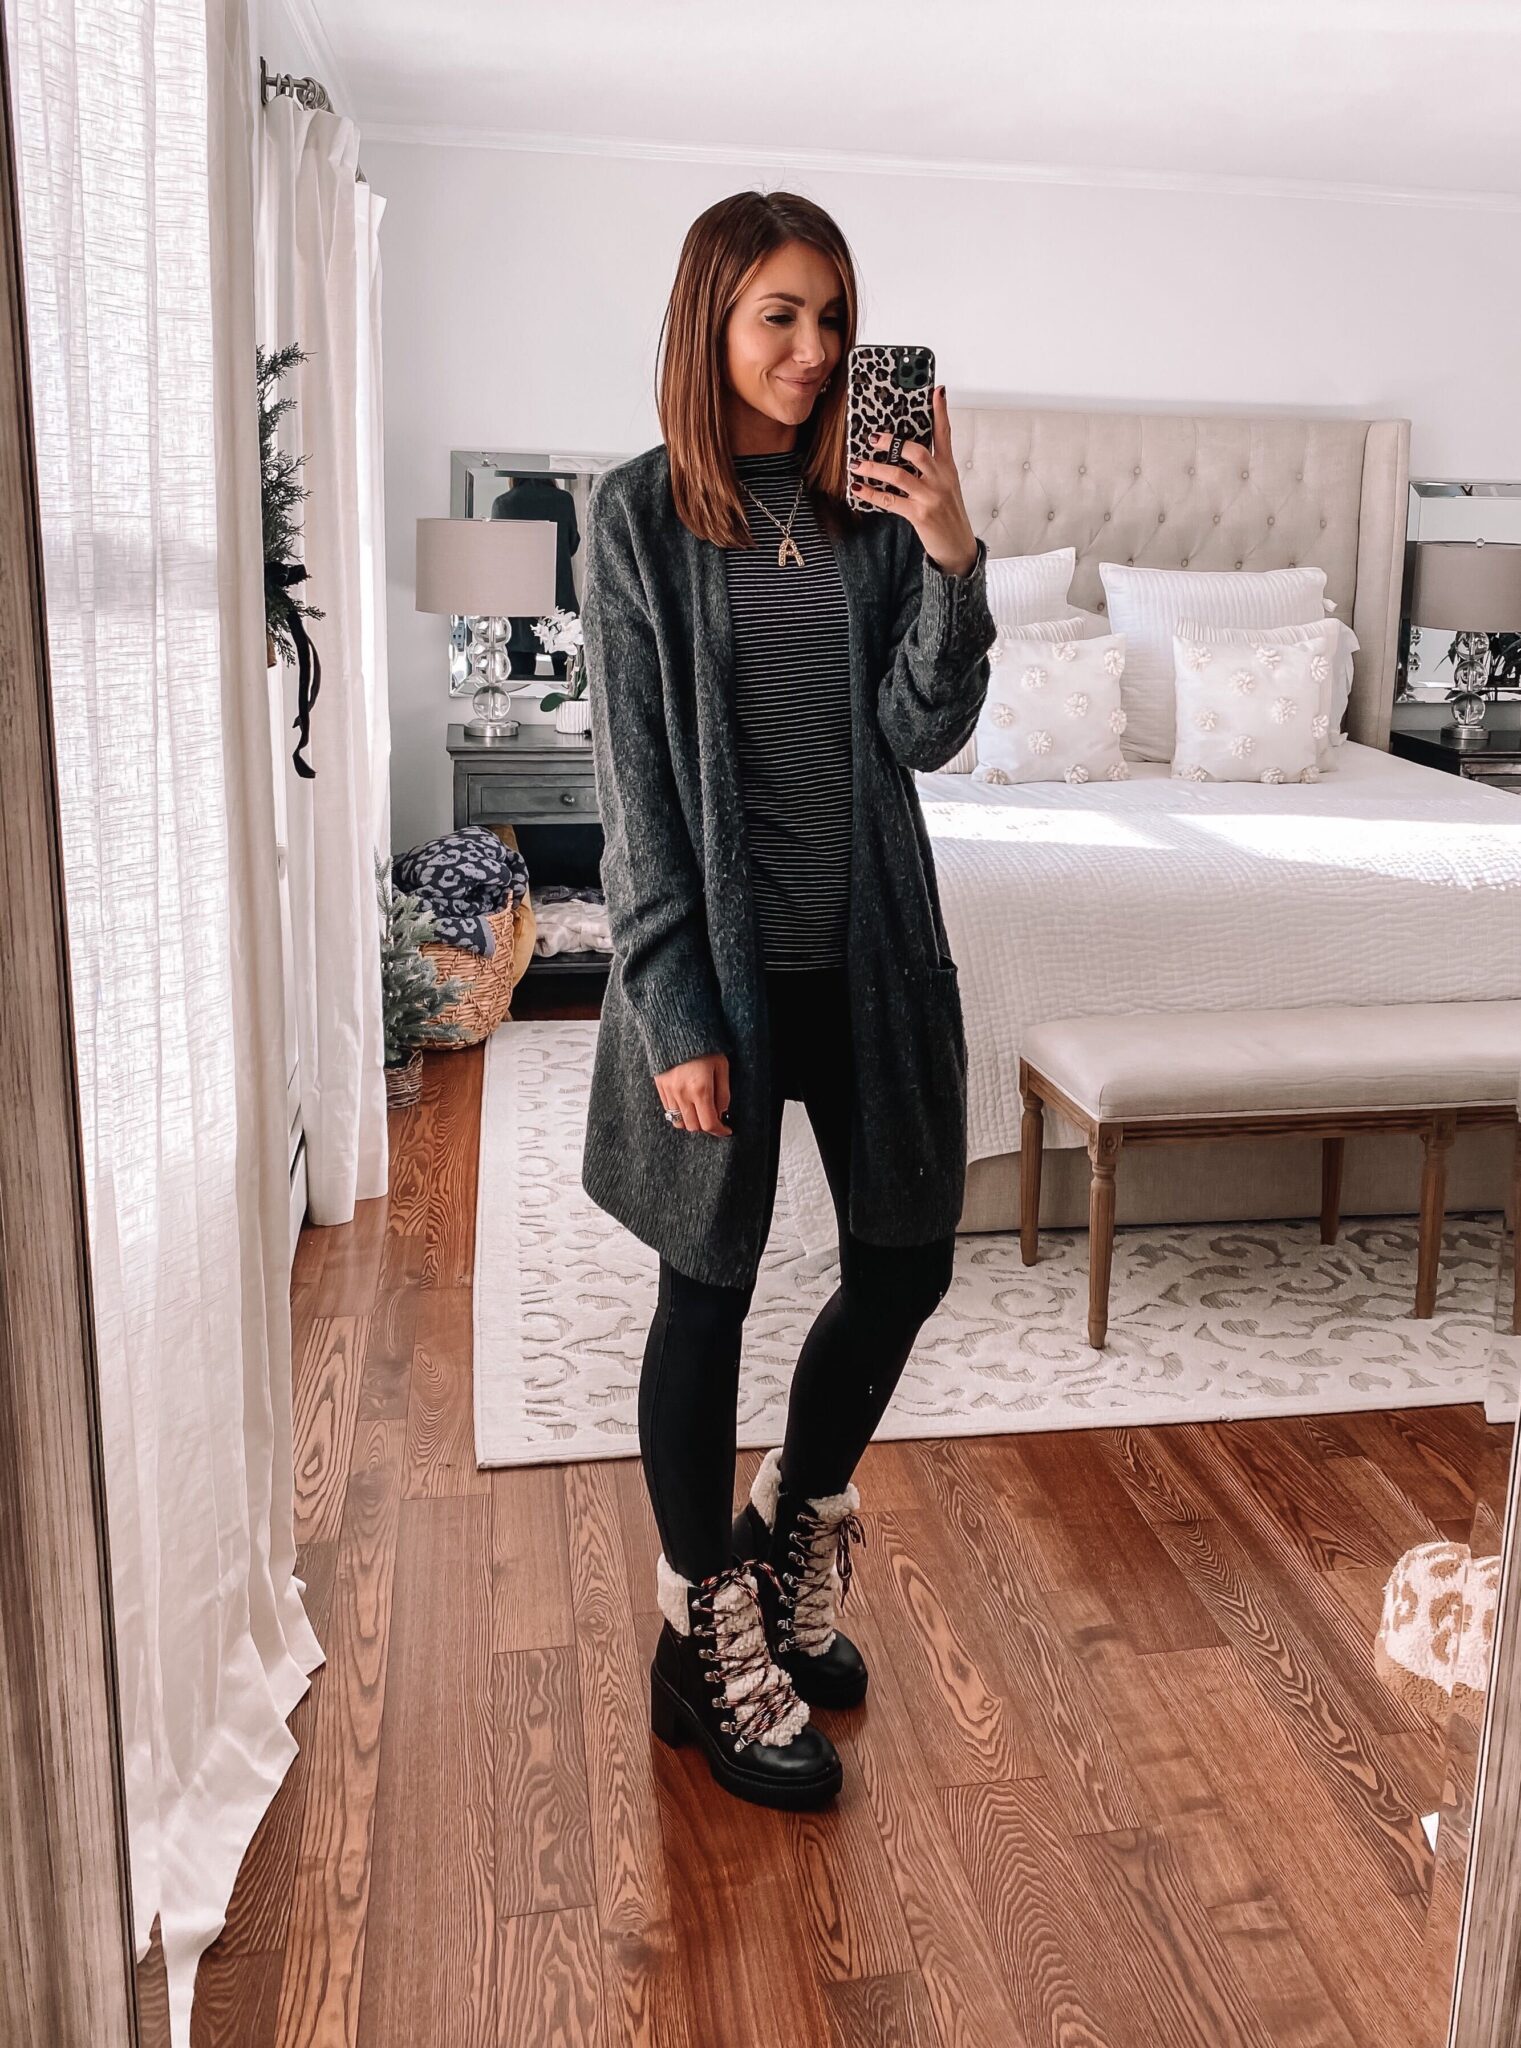 target style, combat boots with faux leather leggings